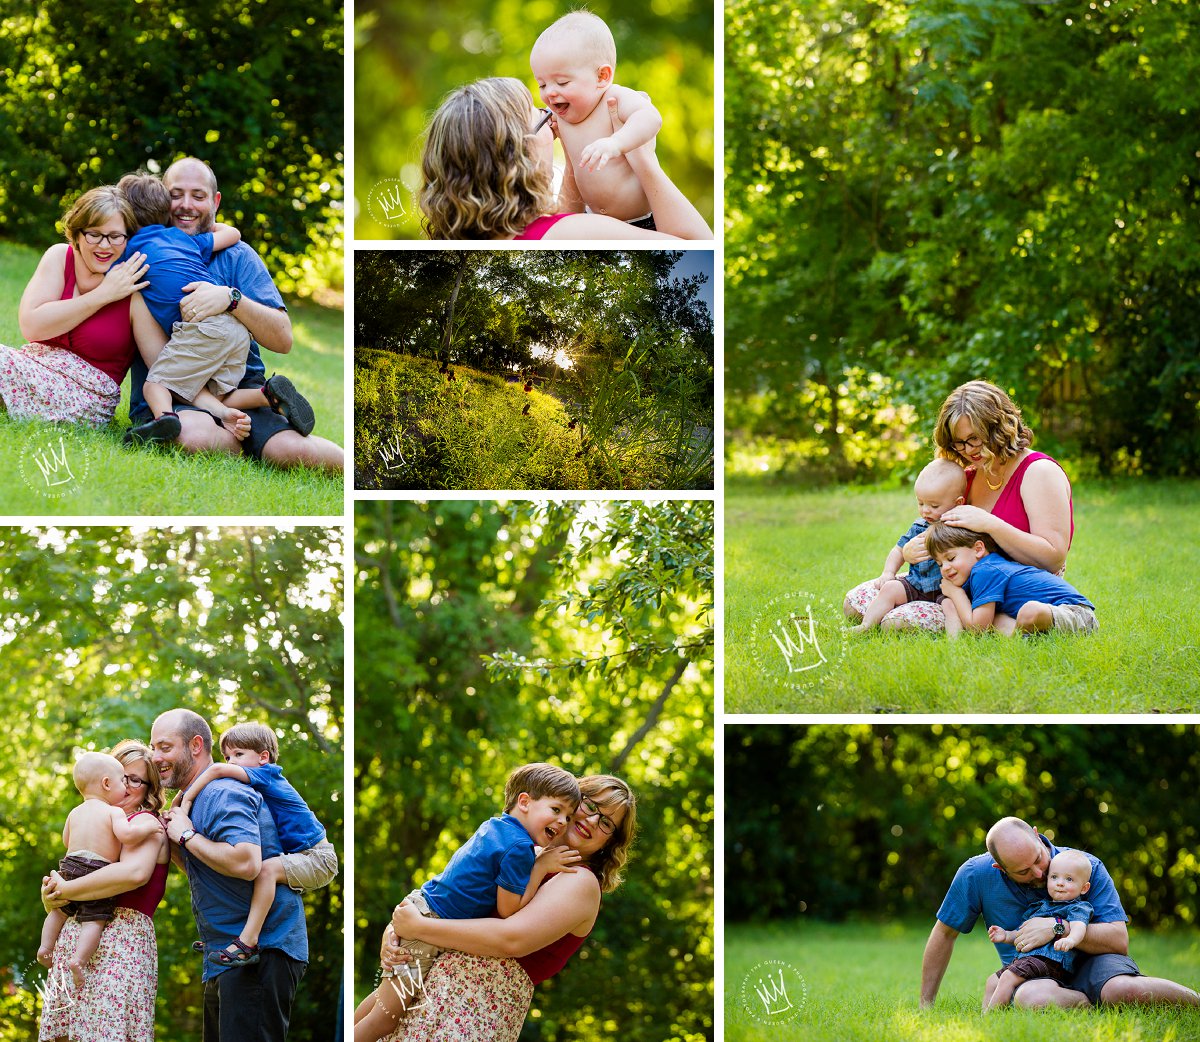 Lifestyle Family Photos in the Park with two little boys